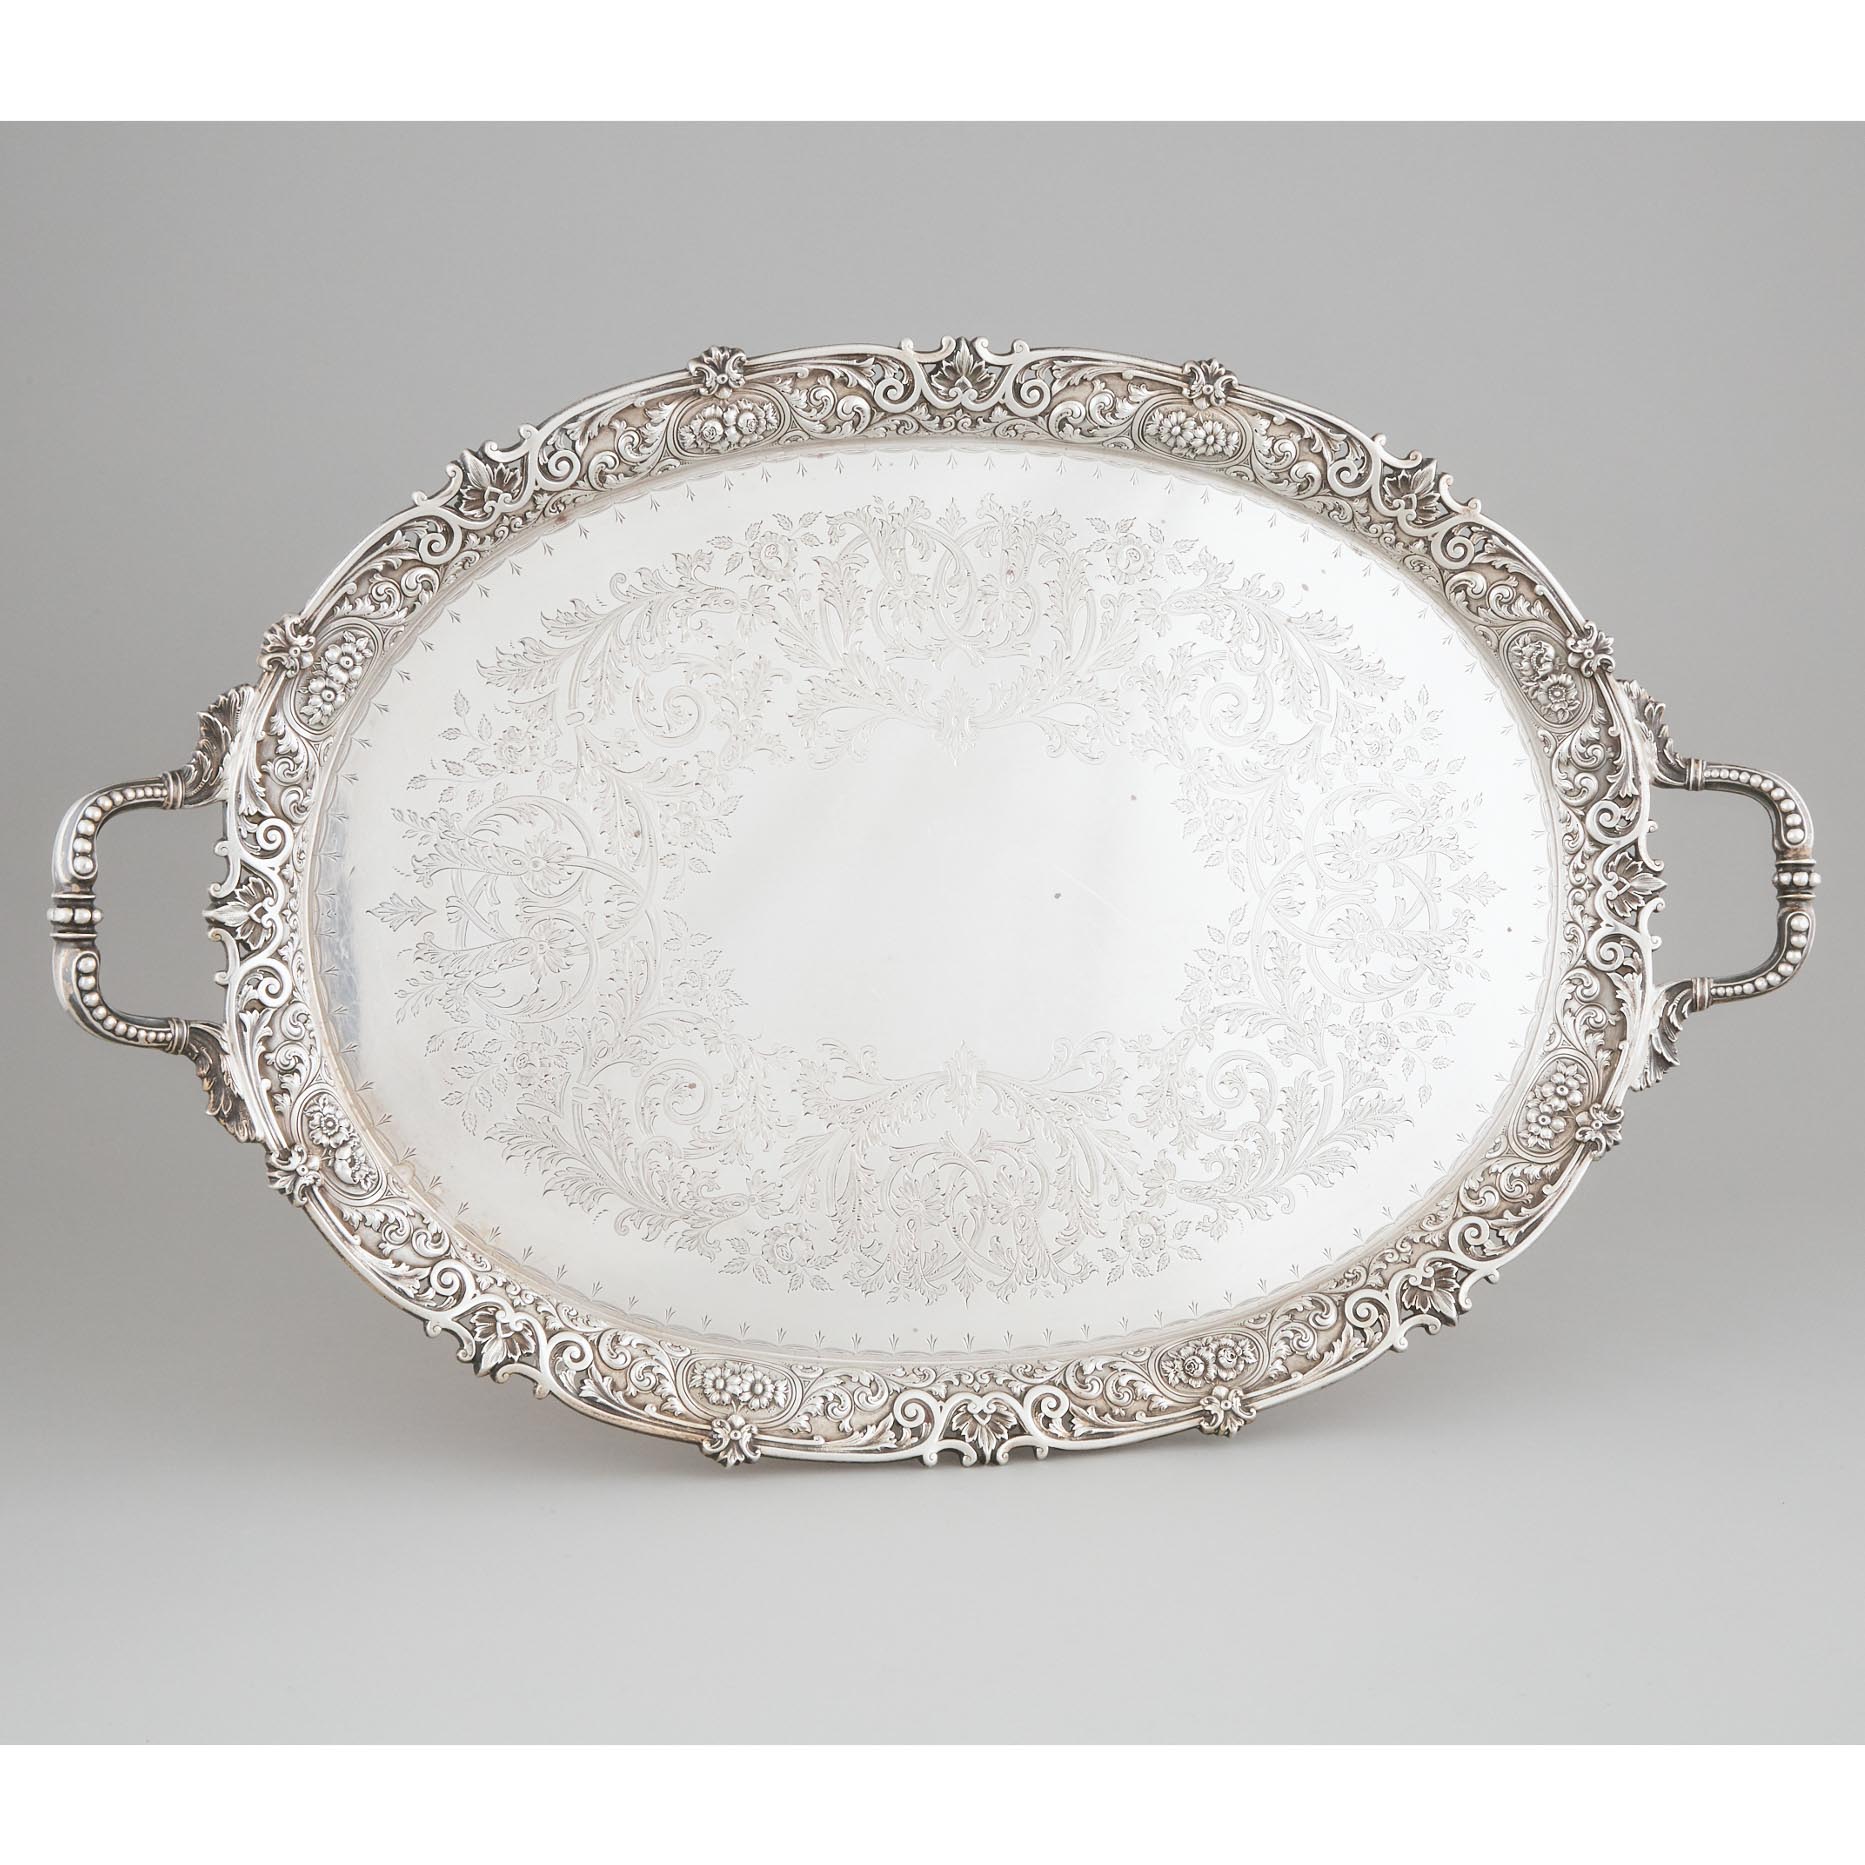 Canadian Silver Two-Handled Oval Serving Tray, Henry Birks & Sons, Montreal, Que., c.1904-24